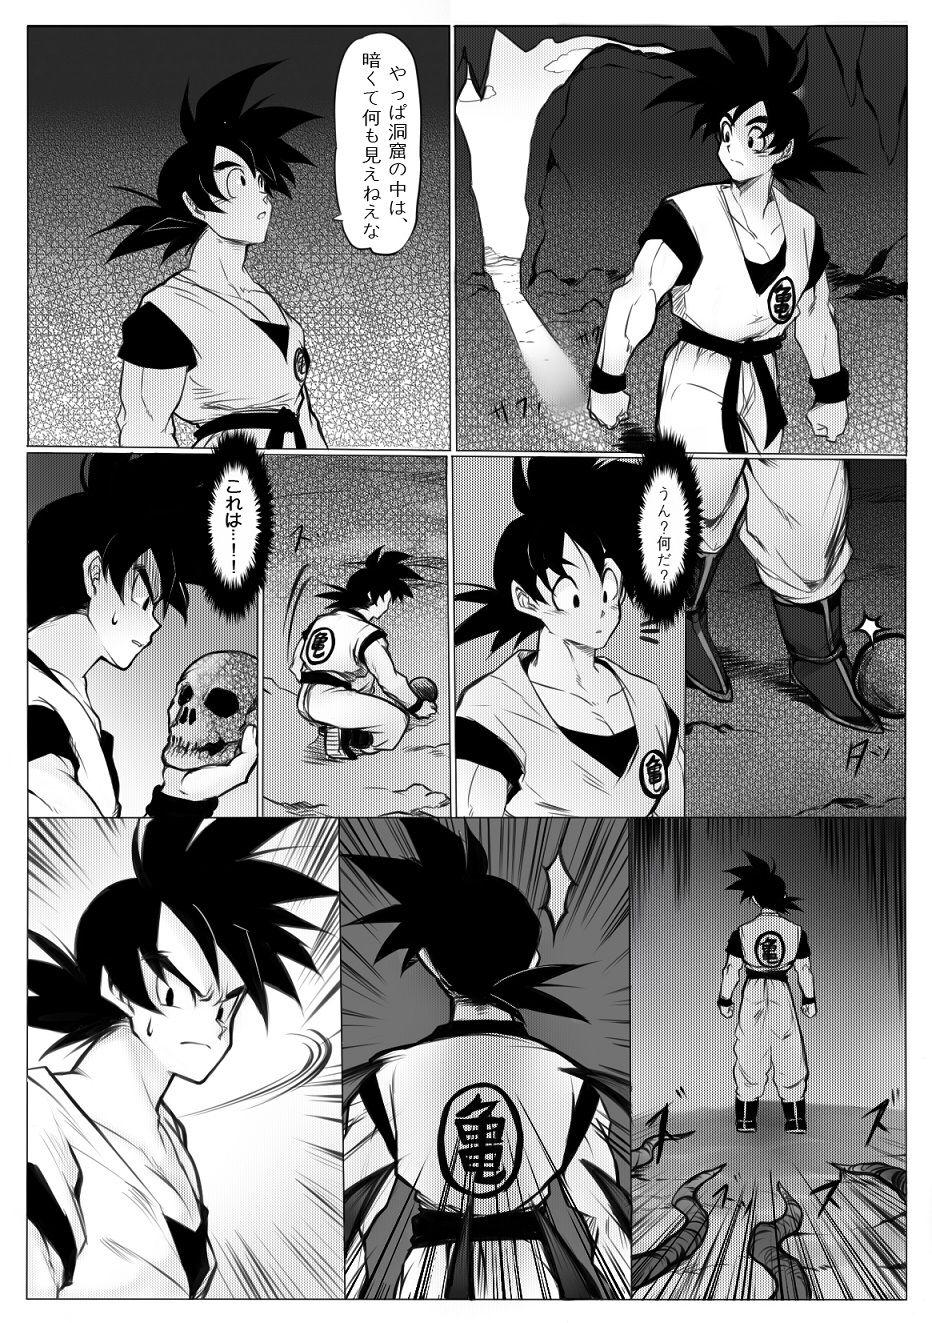 Doggy 接触 - Dragon ball z College - Page 6